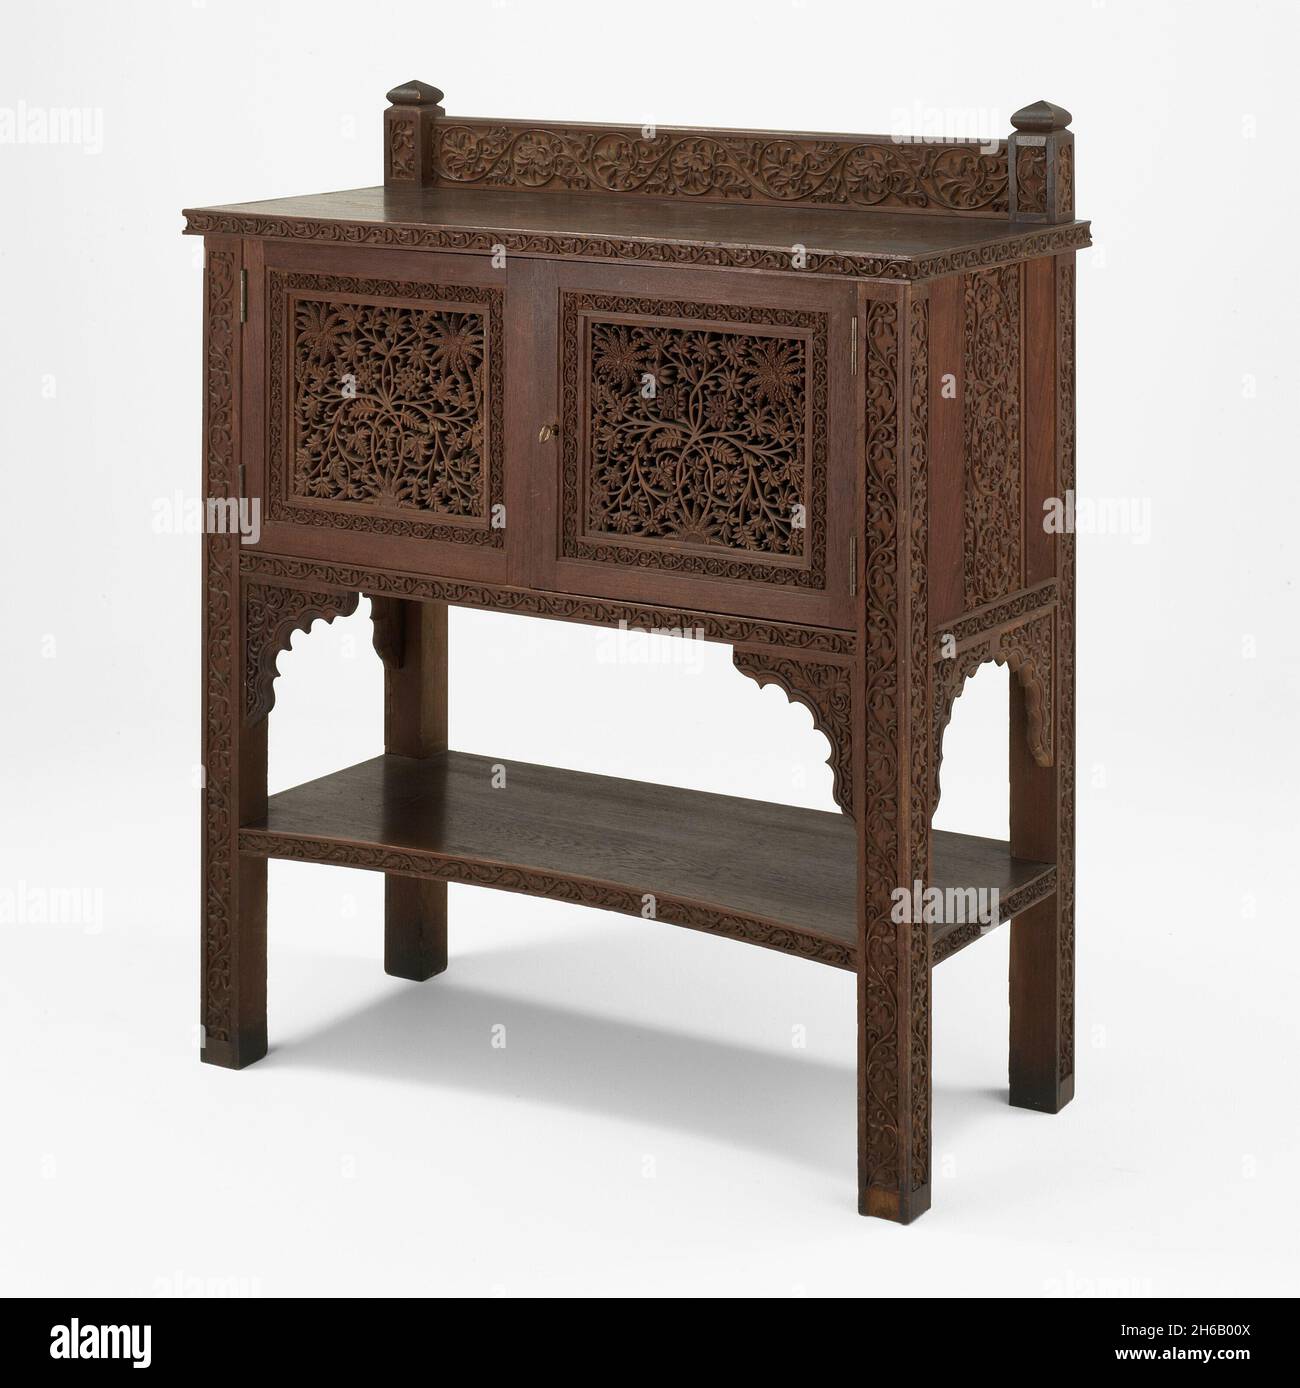 Server, c. 1880/90. Designed by Lockwood de Forest. Wood carved in Ahmedabad, India, assembled in New York. Stock Photo